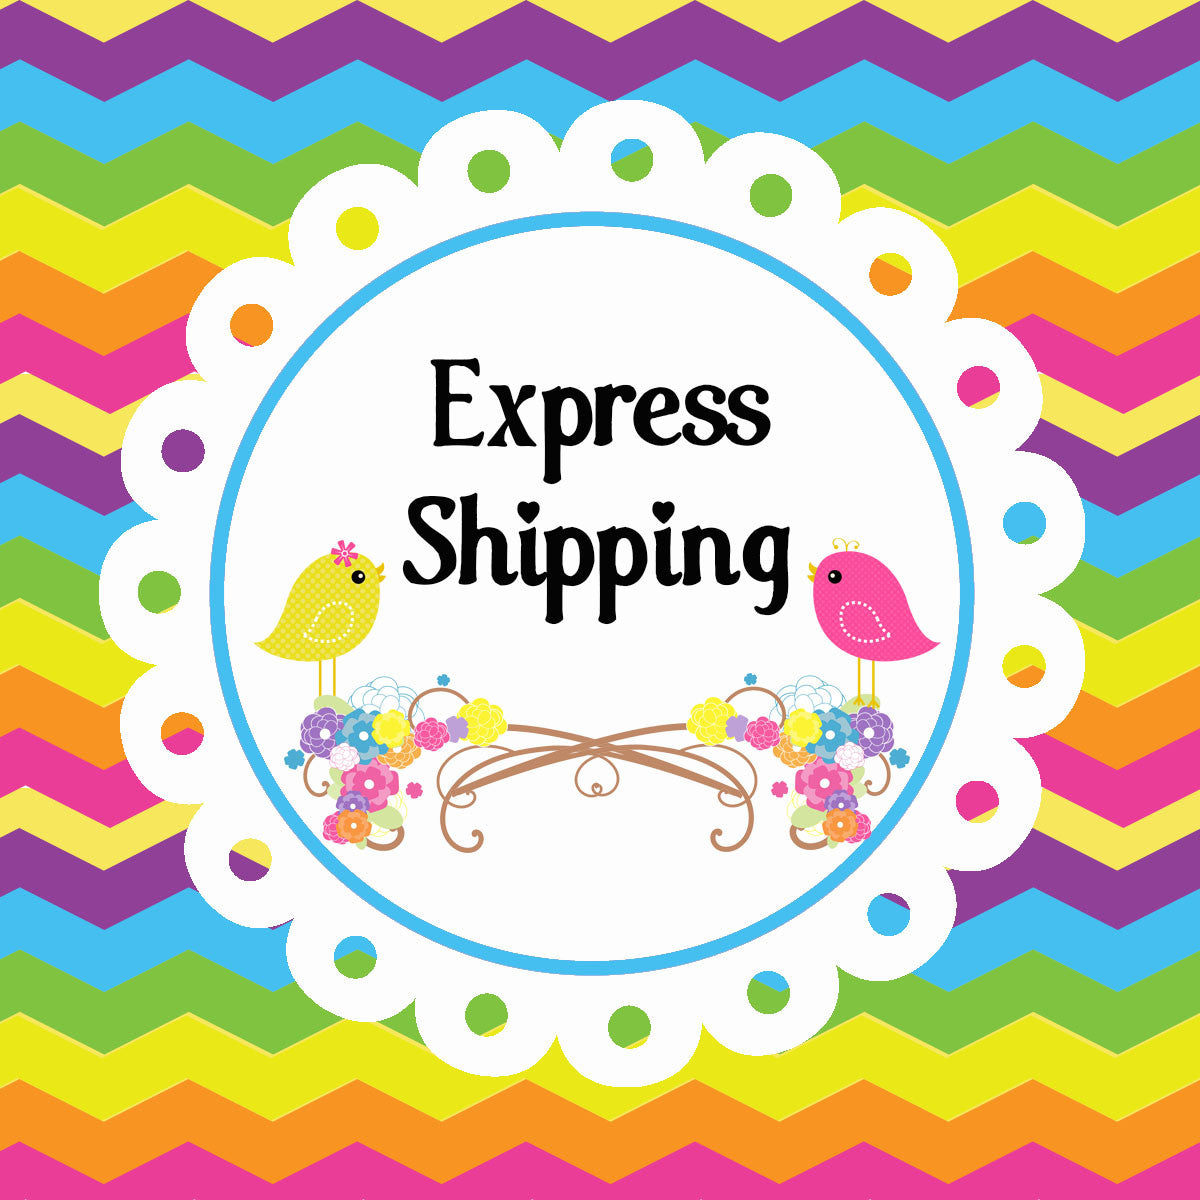 Upgrade to Priority Express Shipping